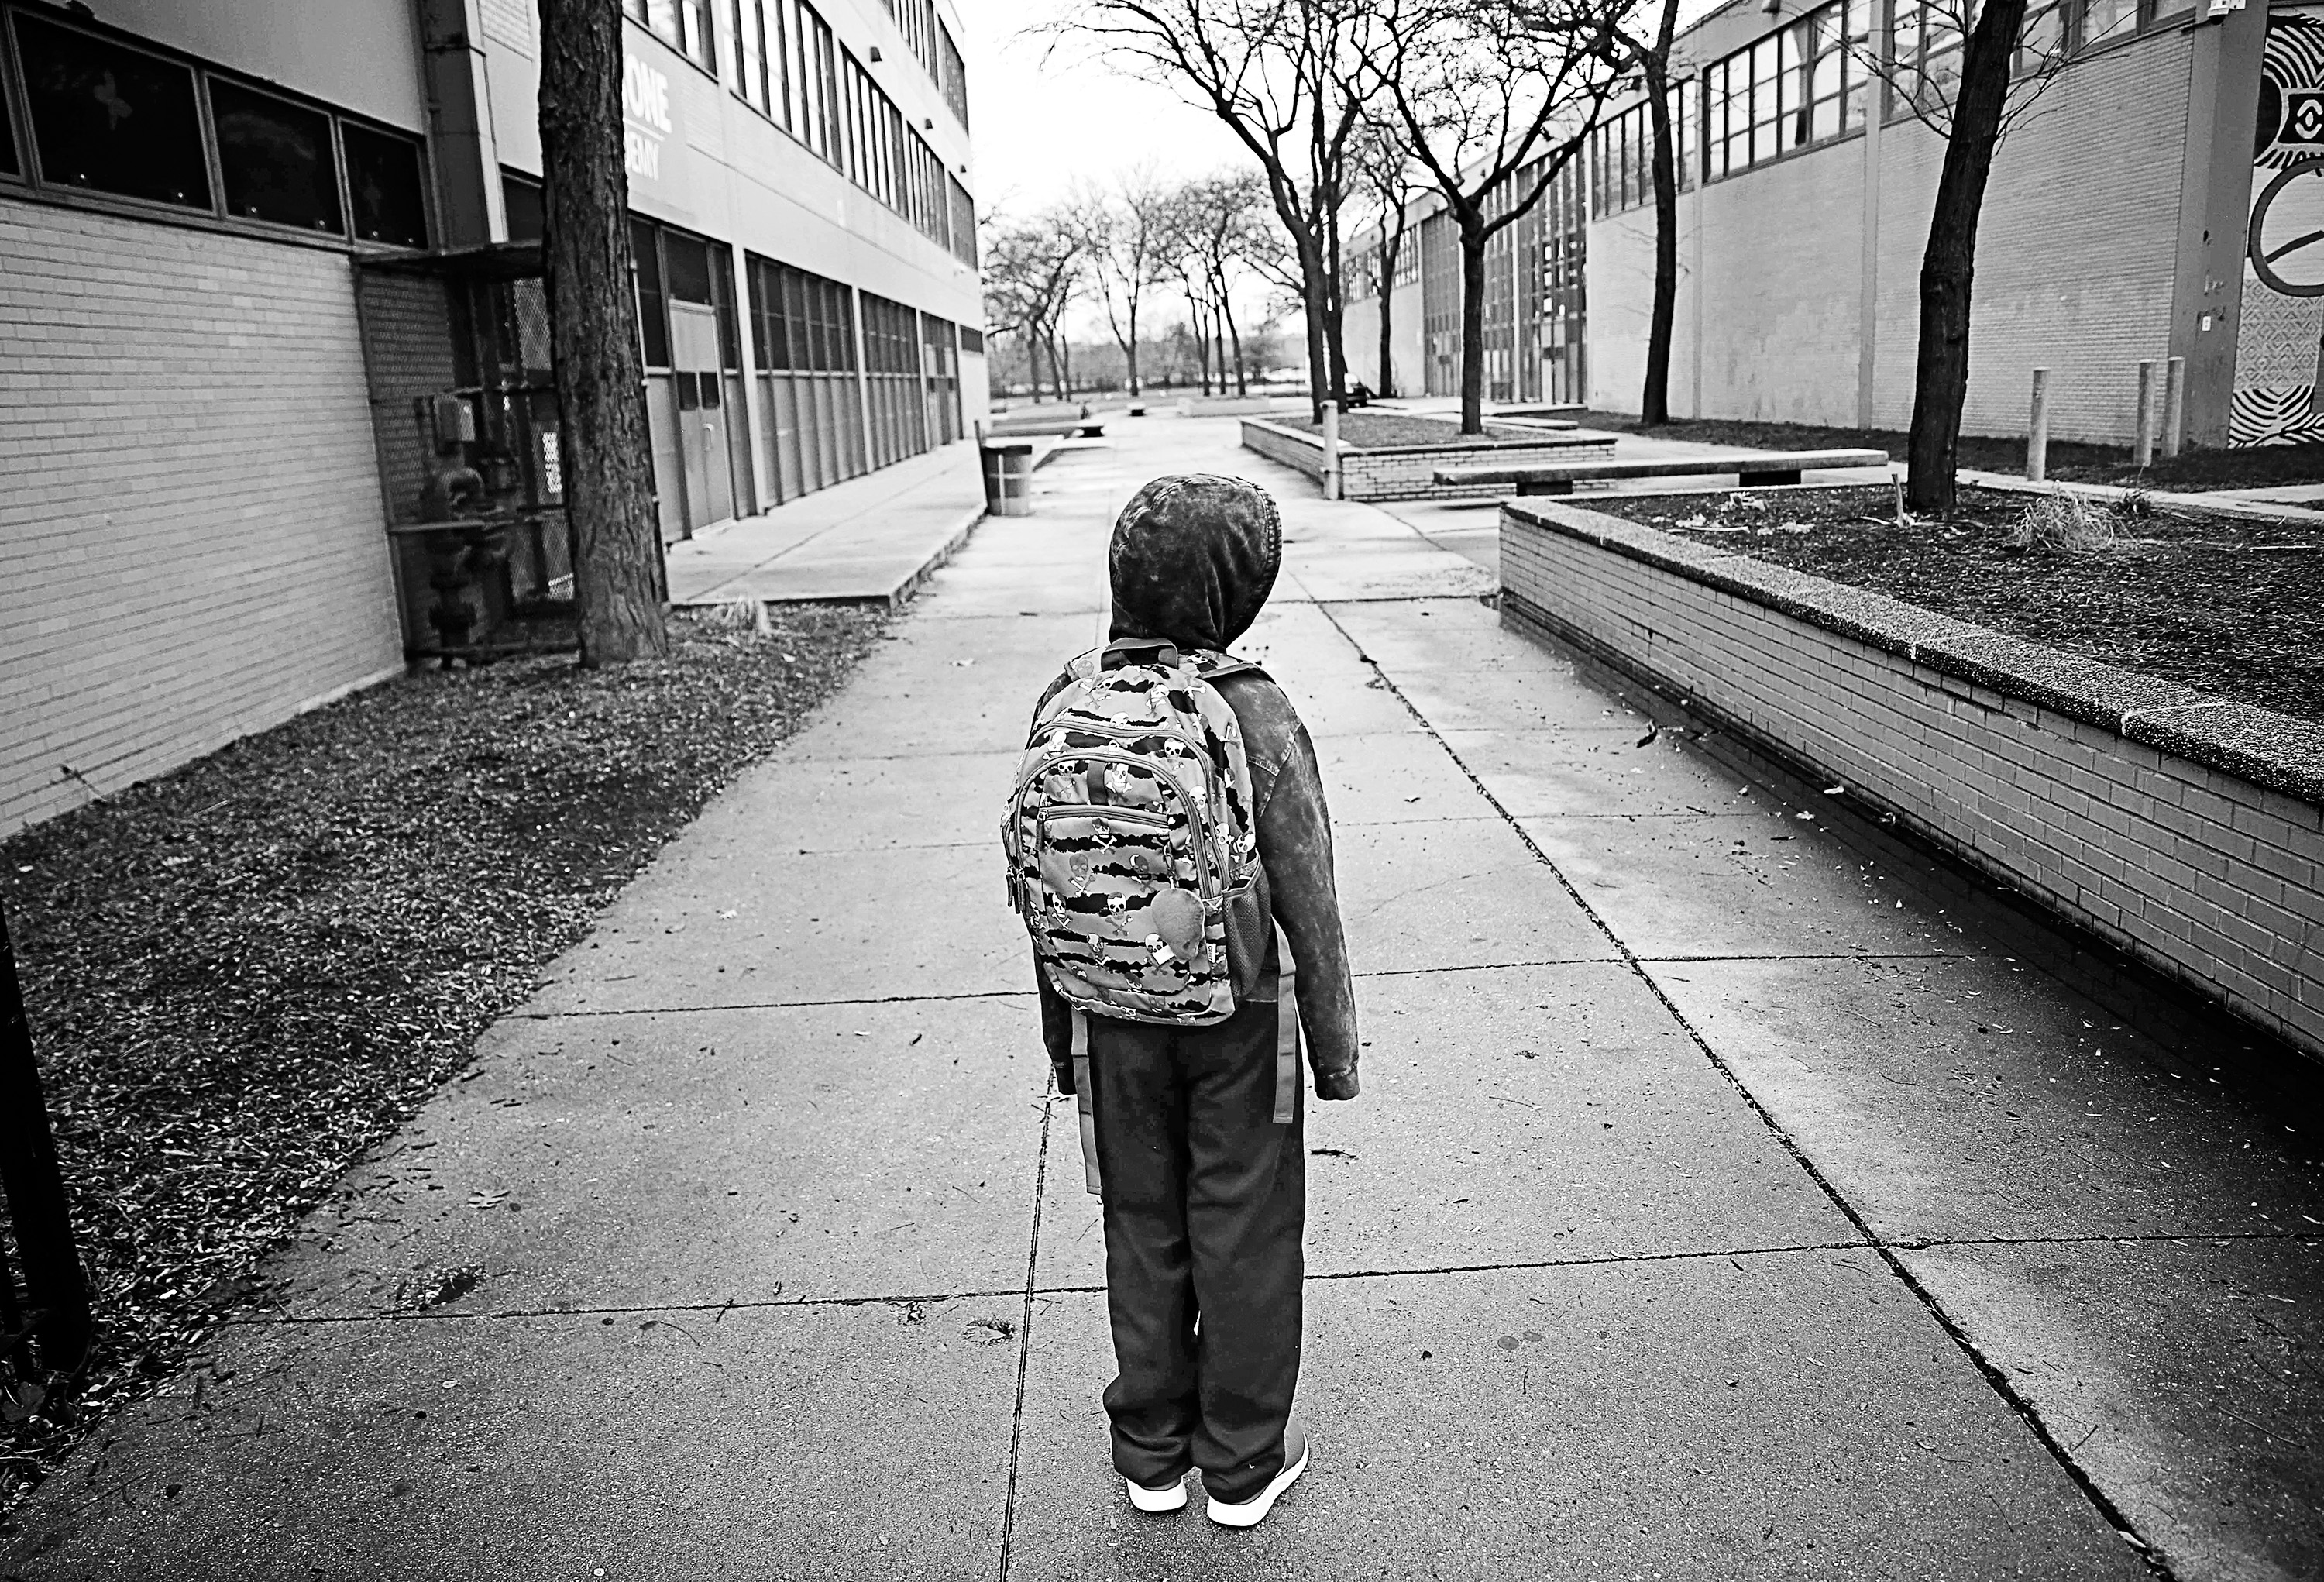 Tavon Tanner, 11, on his way to school, Nov. 28, 2016 in Chicago. Tanner has started attending school for a few hours a week after recovering from his gunshot injuries he received when he was shot on his porch on Aug. 8, 2016. (E. Jason Wambsgans&mdash;Chicago Tribue/TNS/Getty Images)